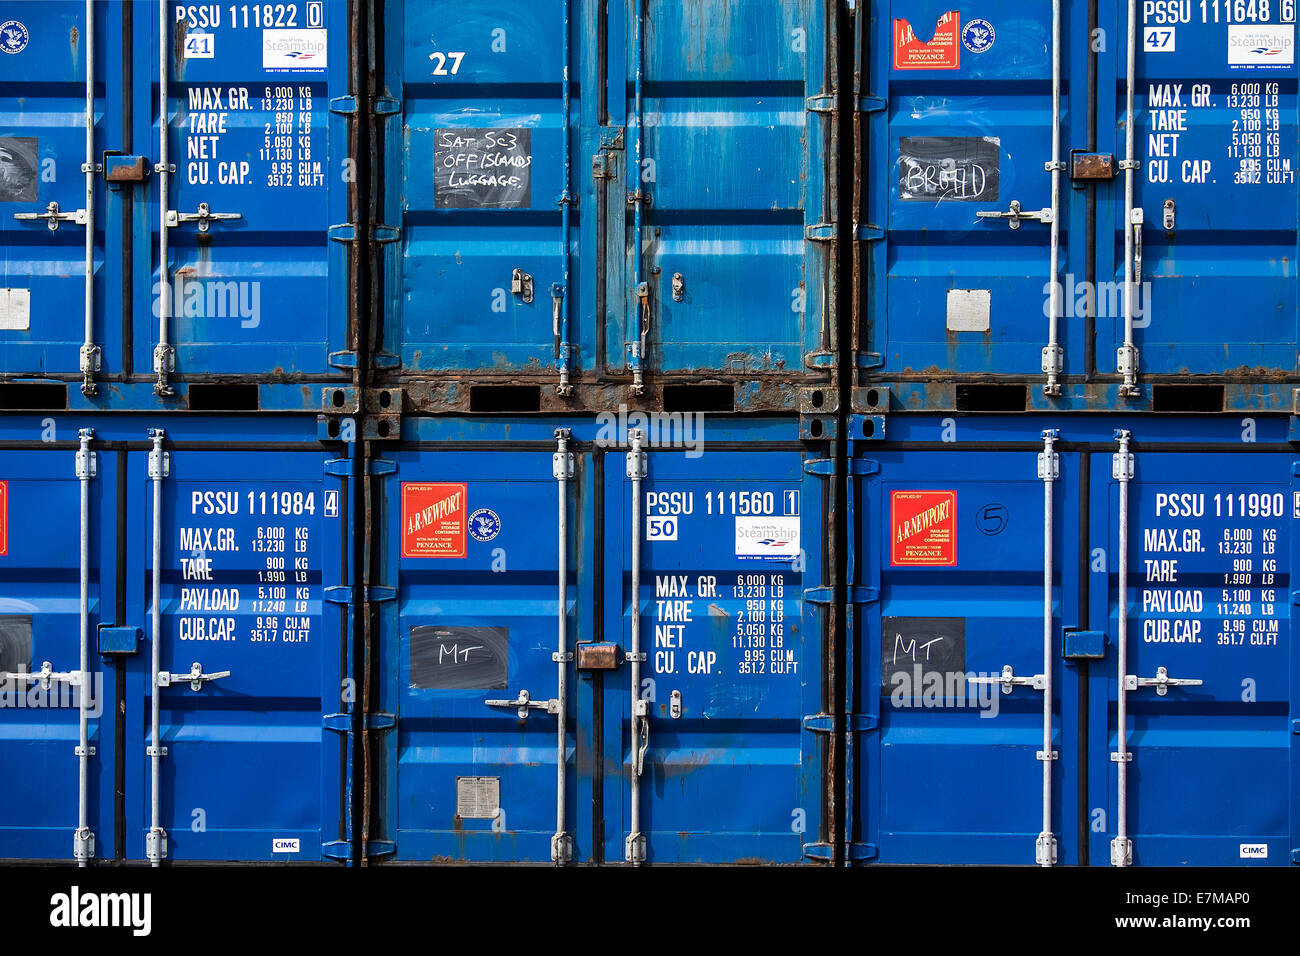 Containers stacked ready for shipping. Stock Photo